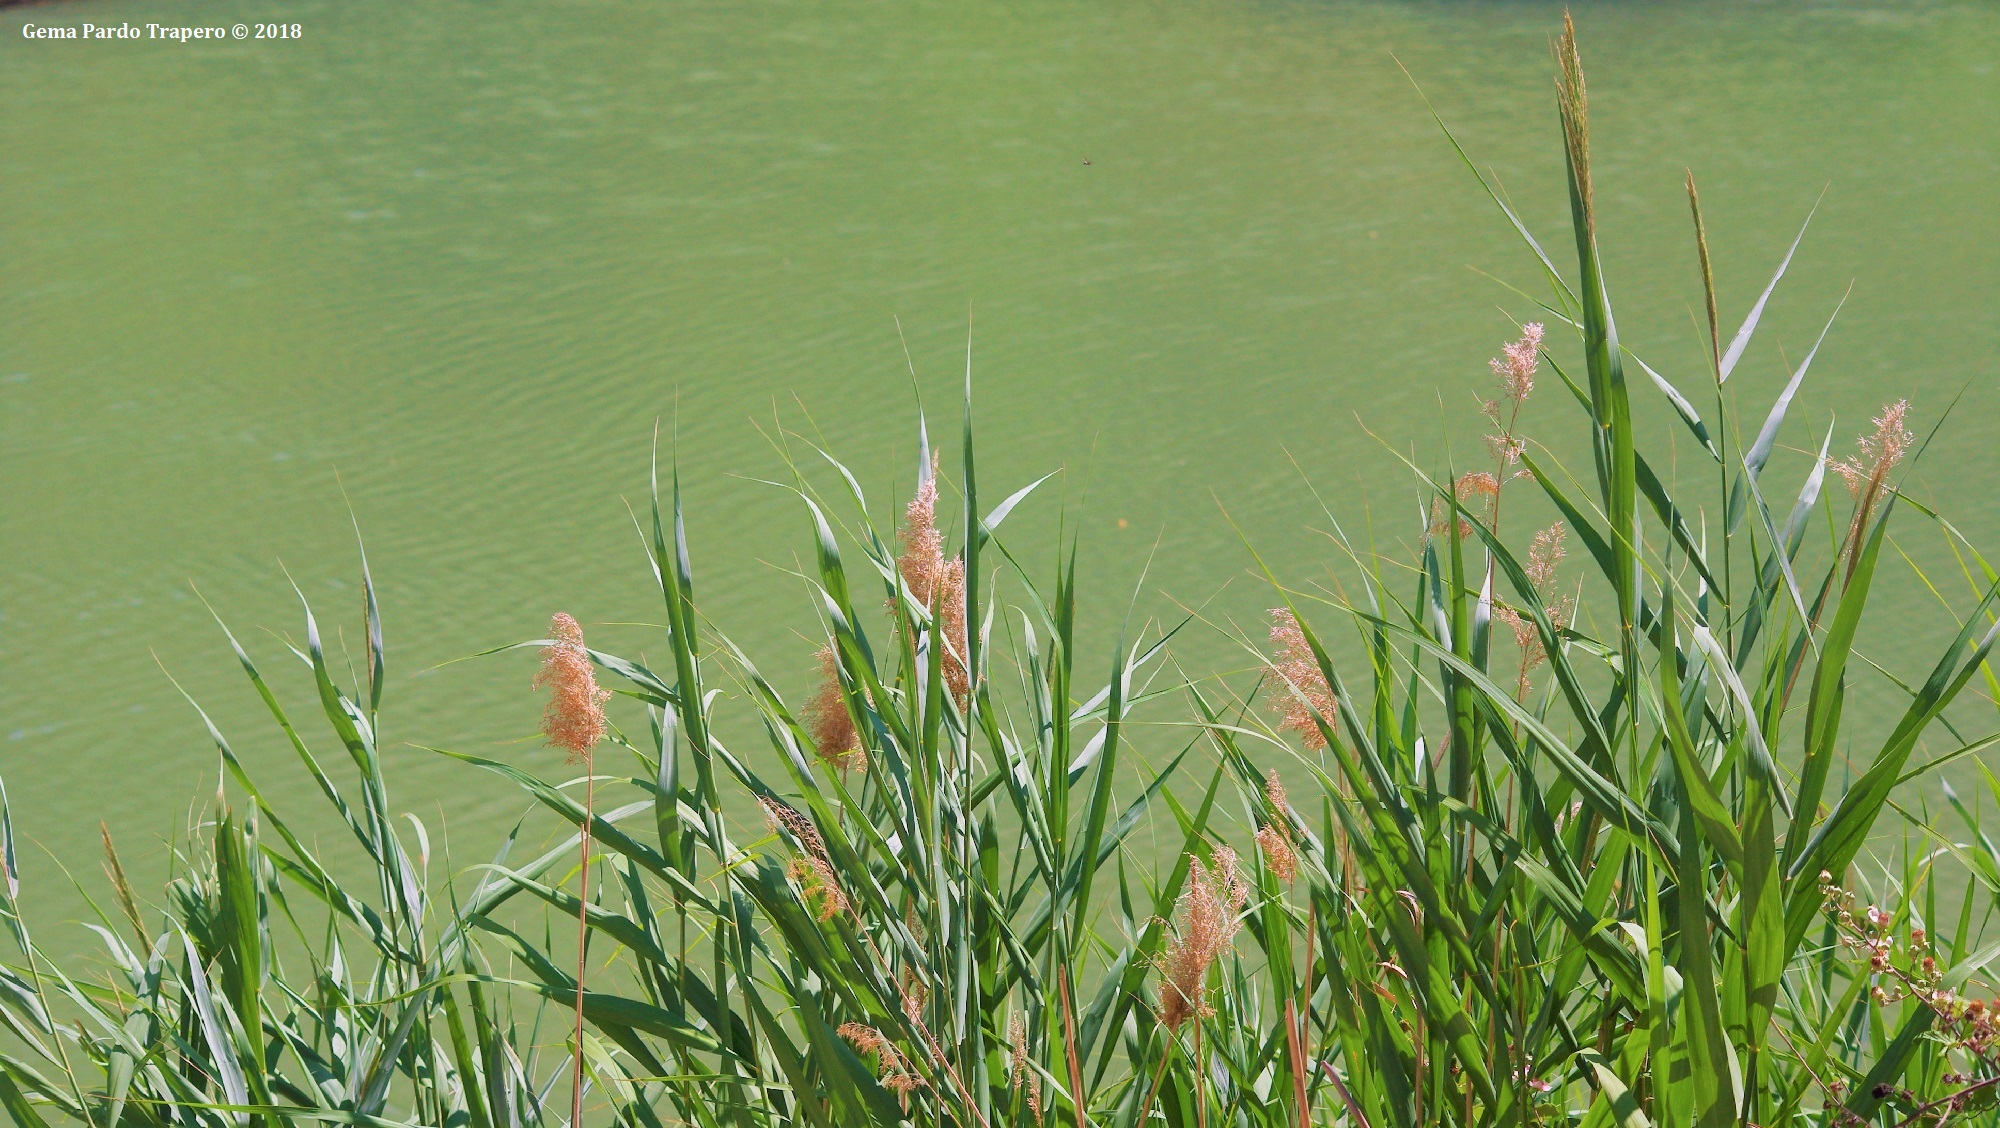 earth, river, nature, reed, spain, water